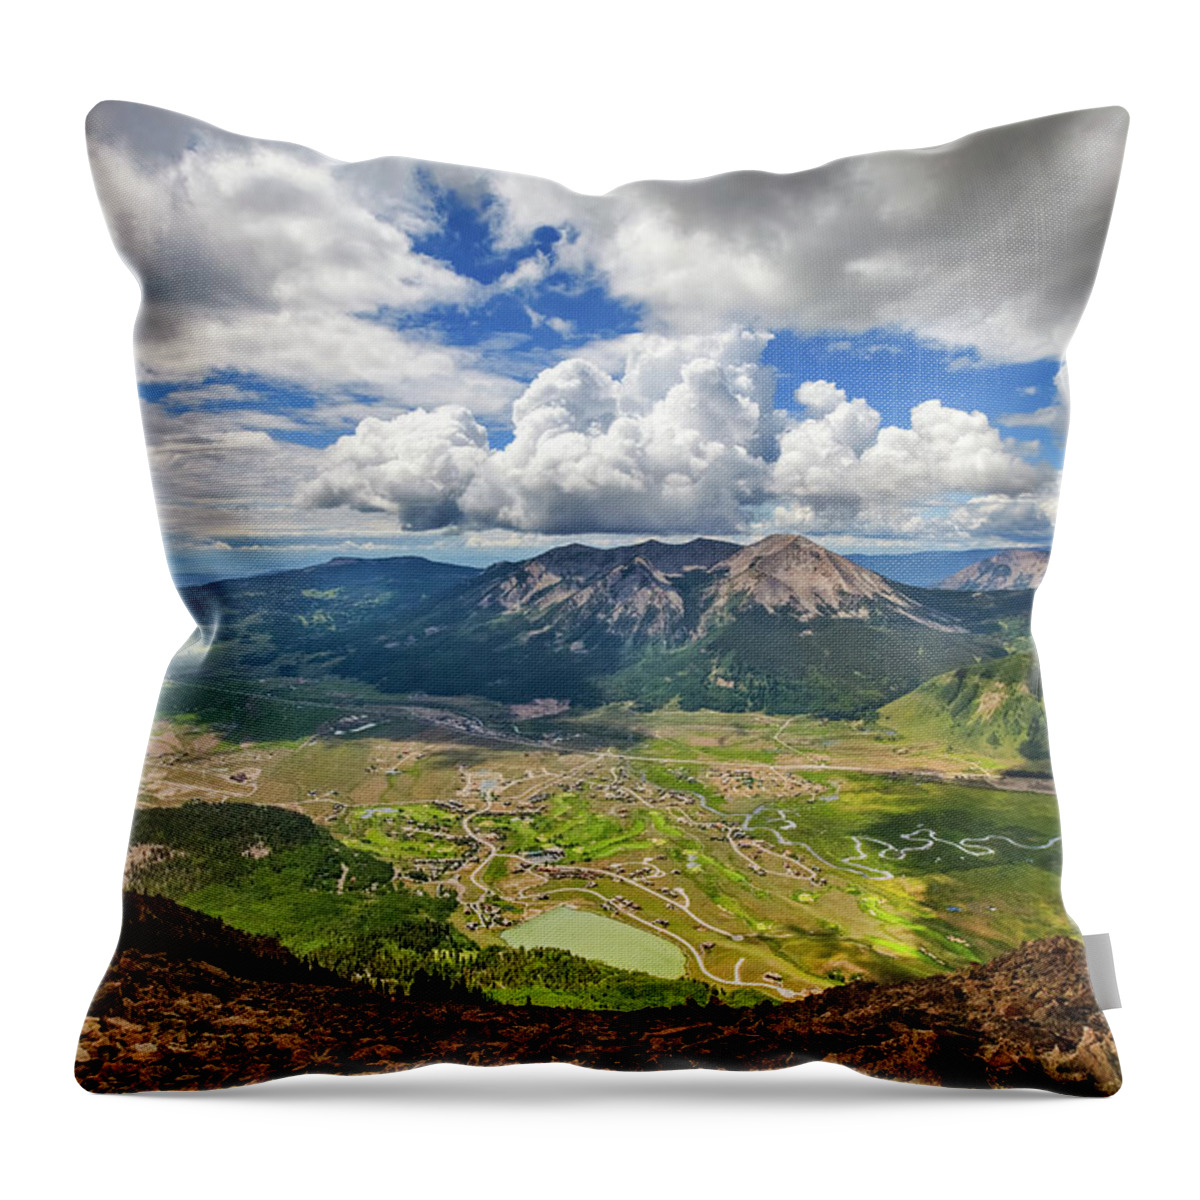 Colorado Throw Pillow featuring the photograph Crested Butte Clouds by Darren White